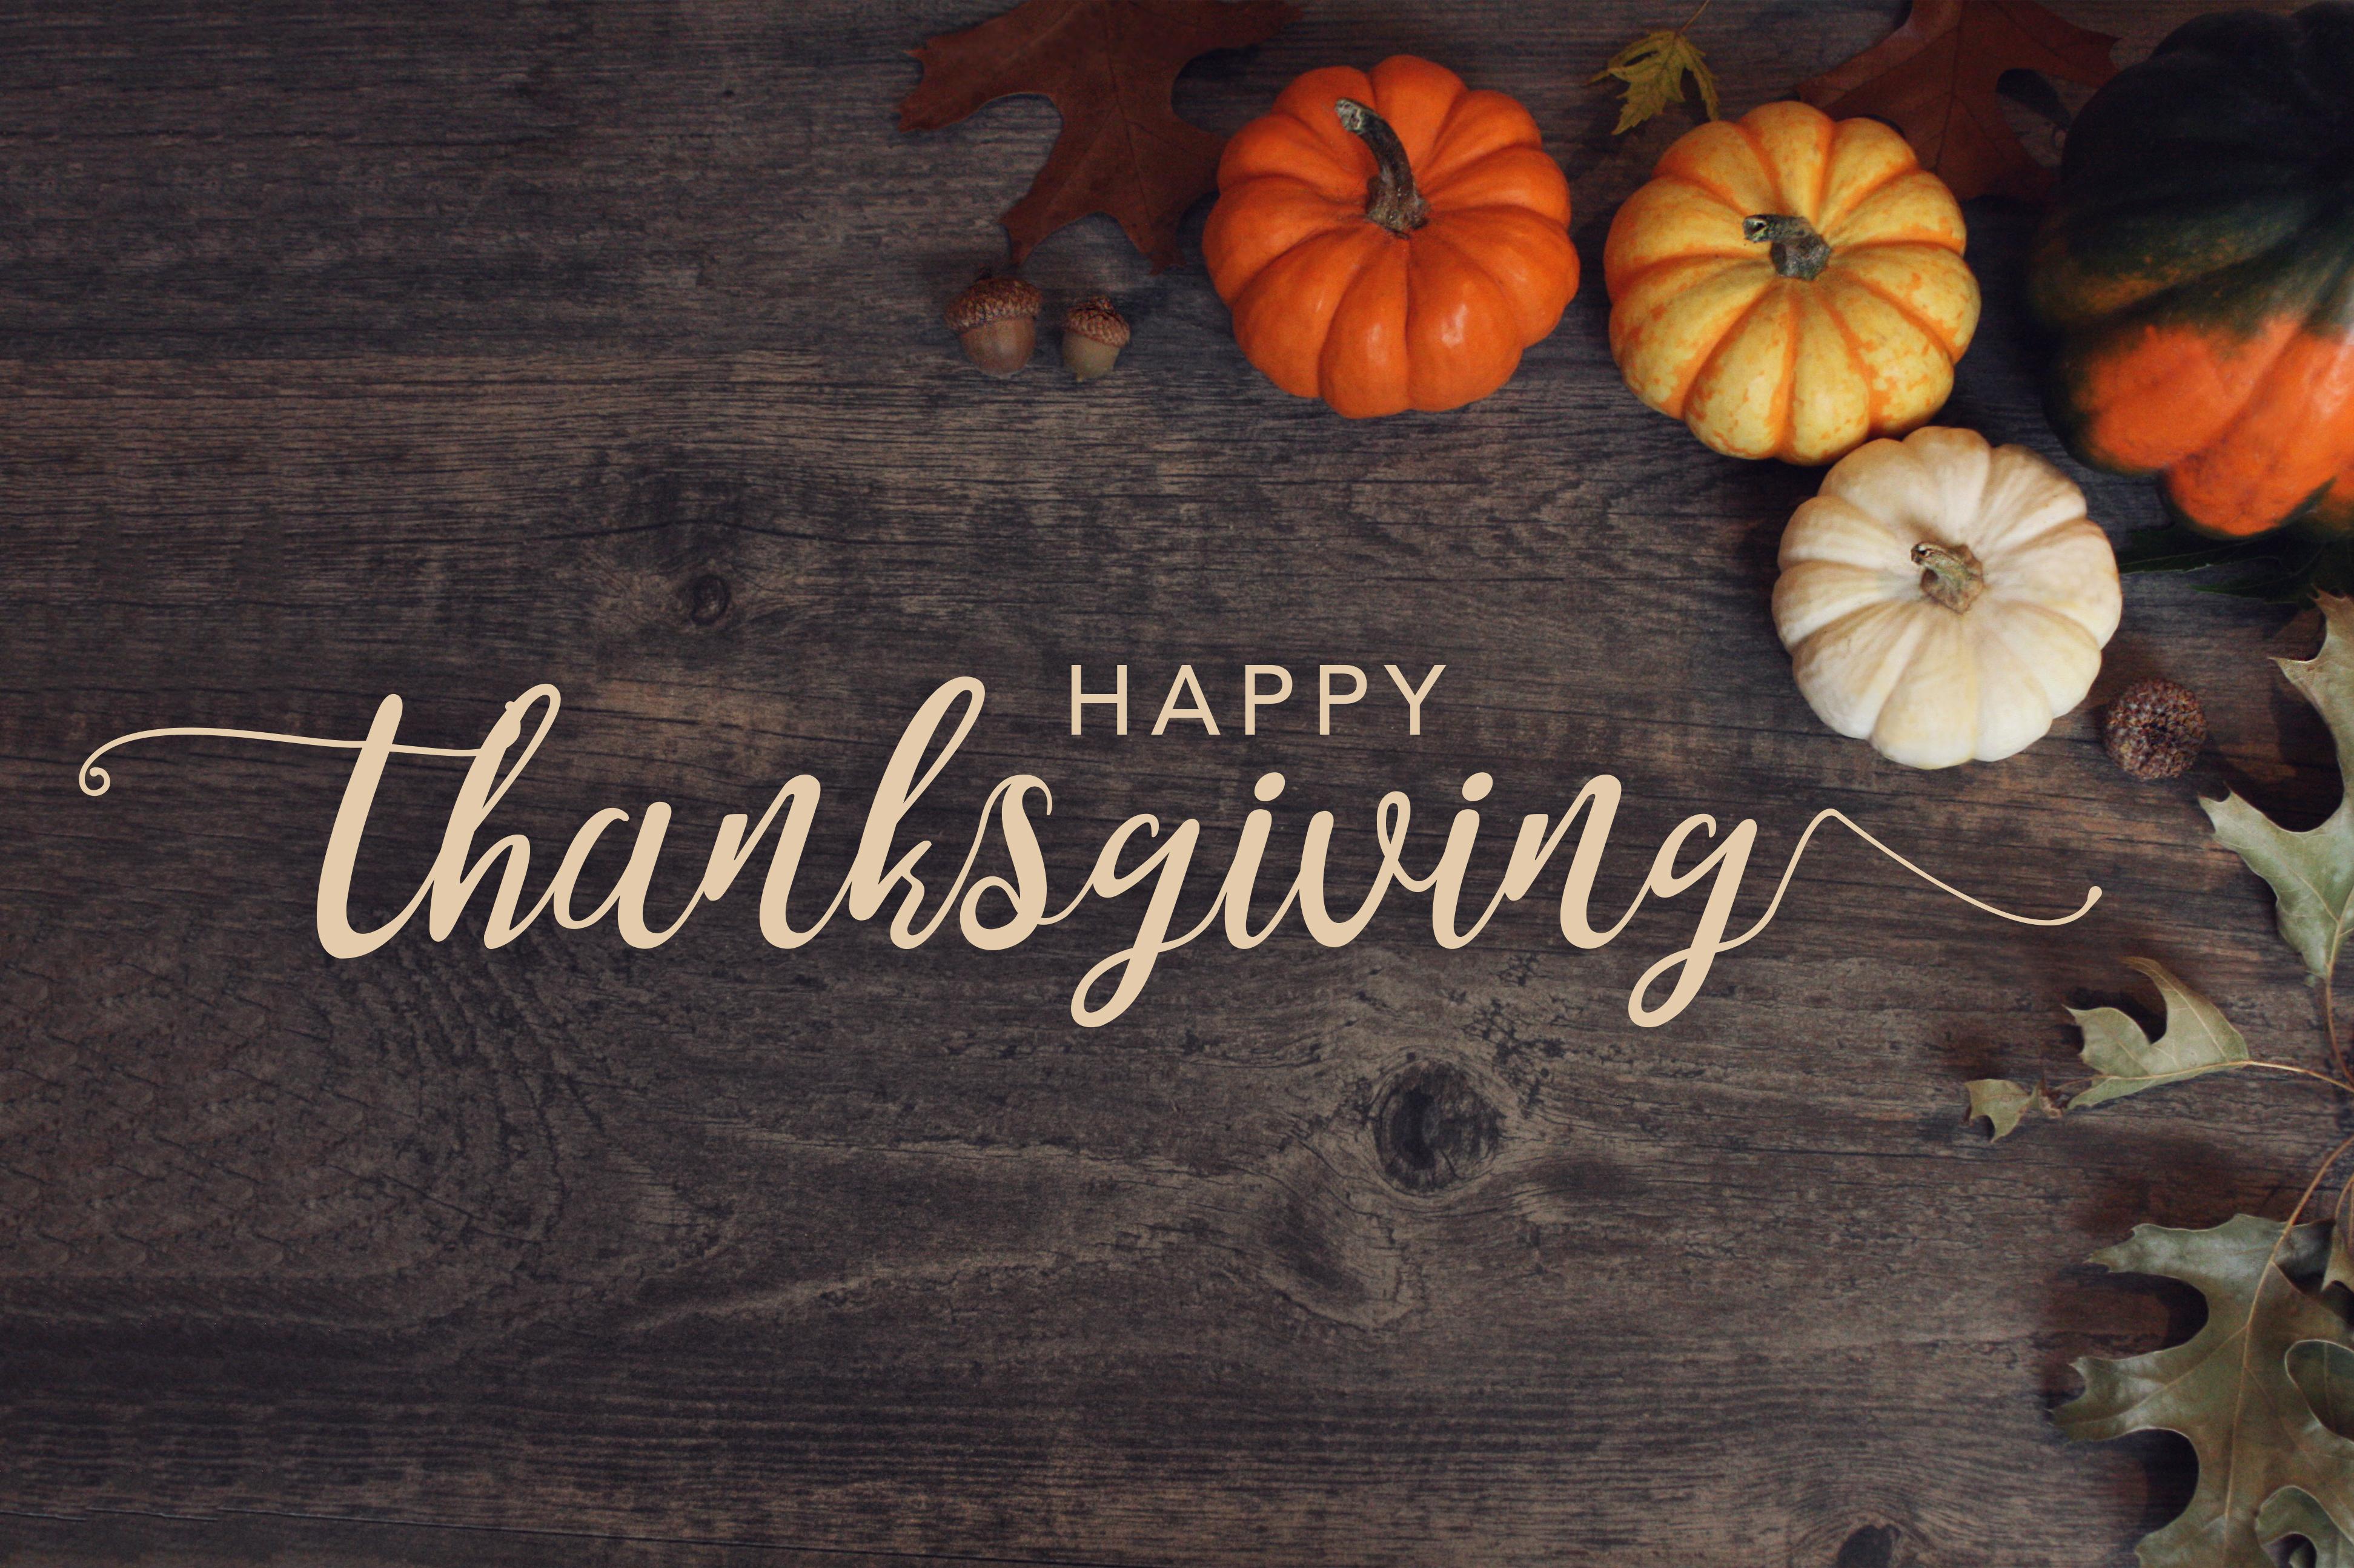 Happy Thanksgiving 2019 Wallpapers - Wallpaper Cave